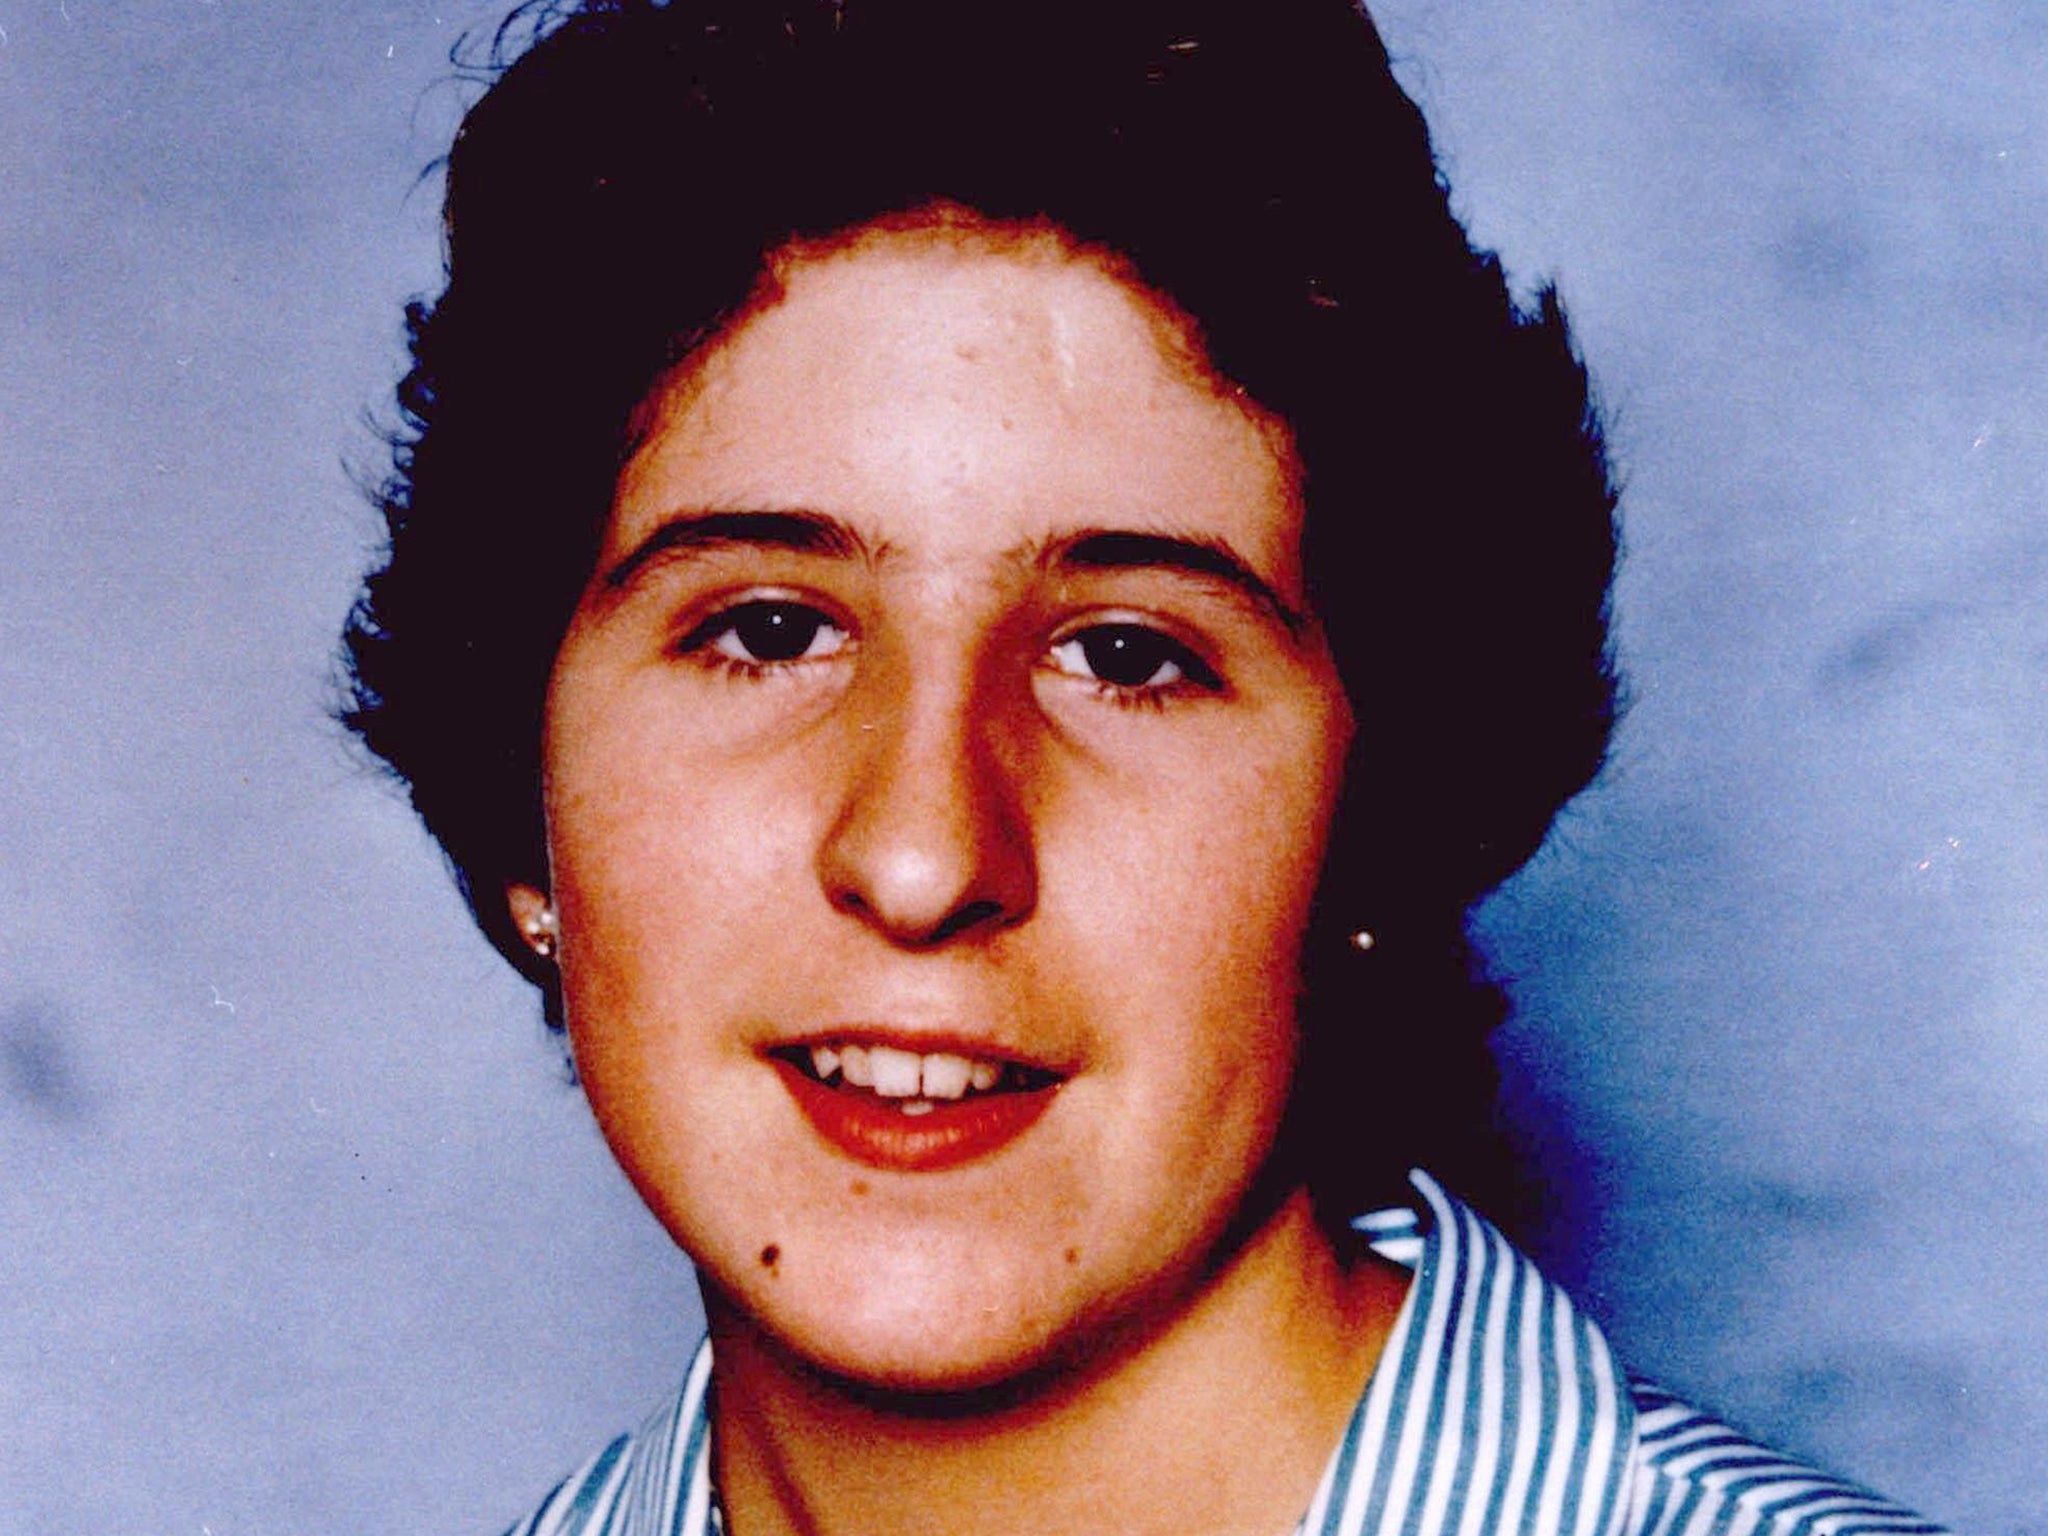 Claire Tiltman was killed in 1993